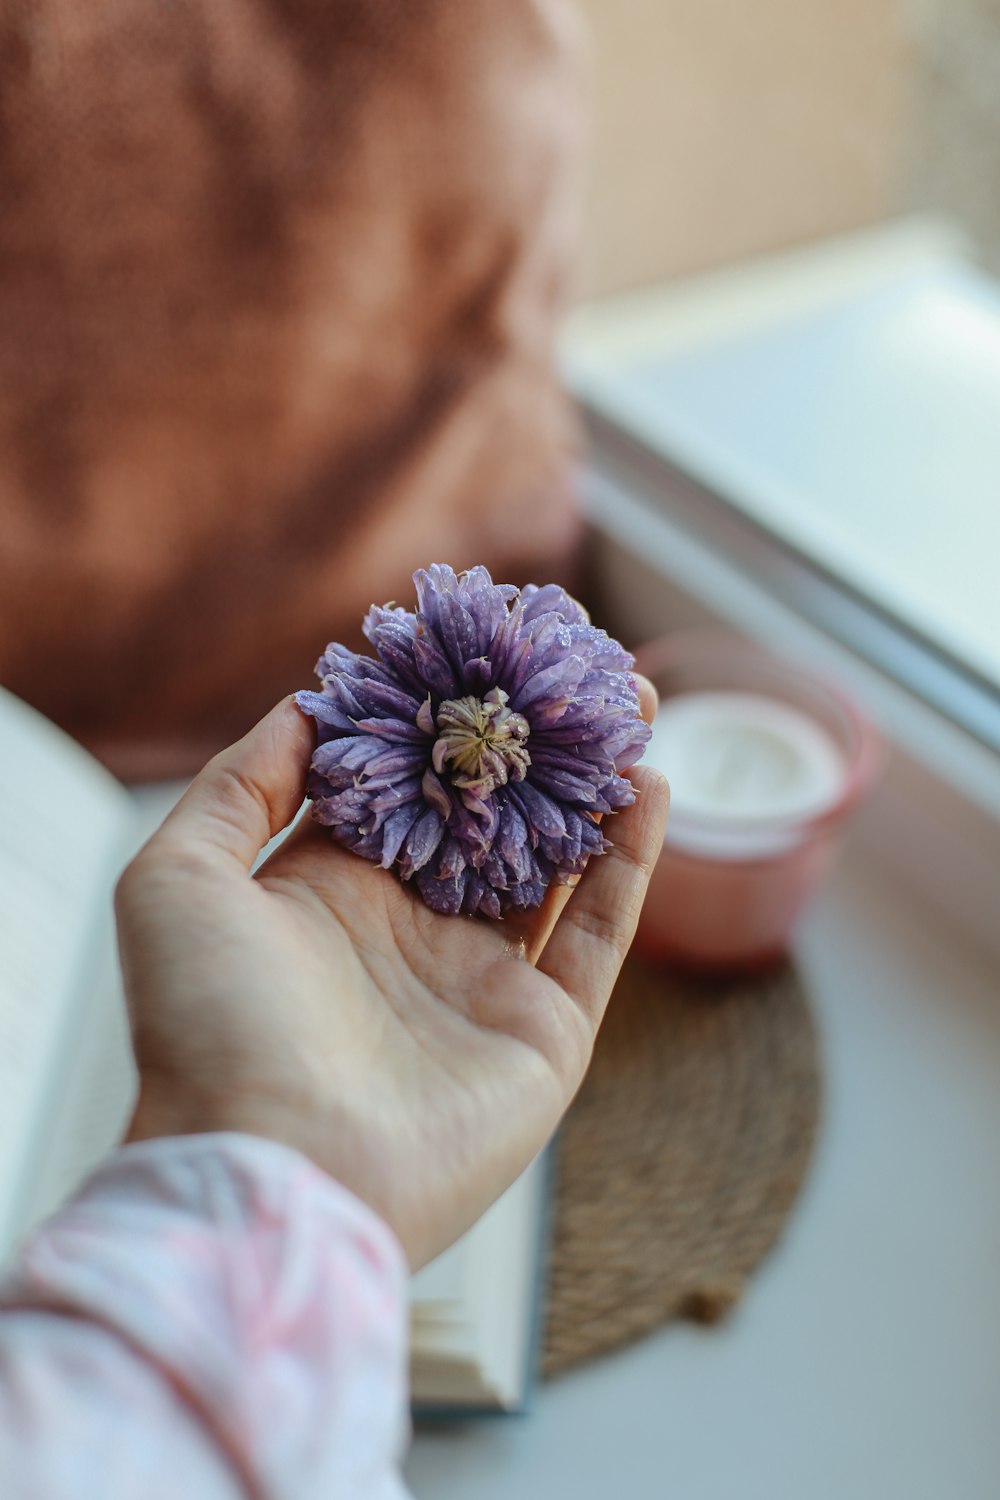 a person holding a purple flower